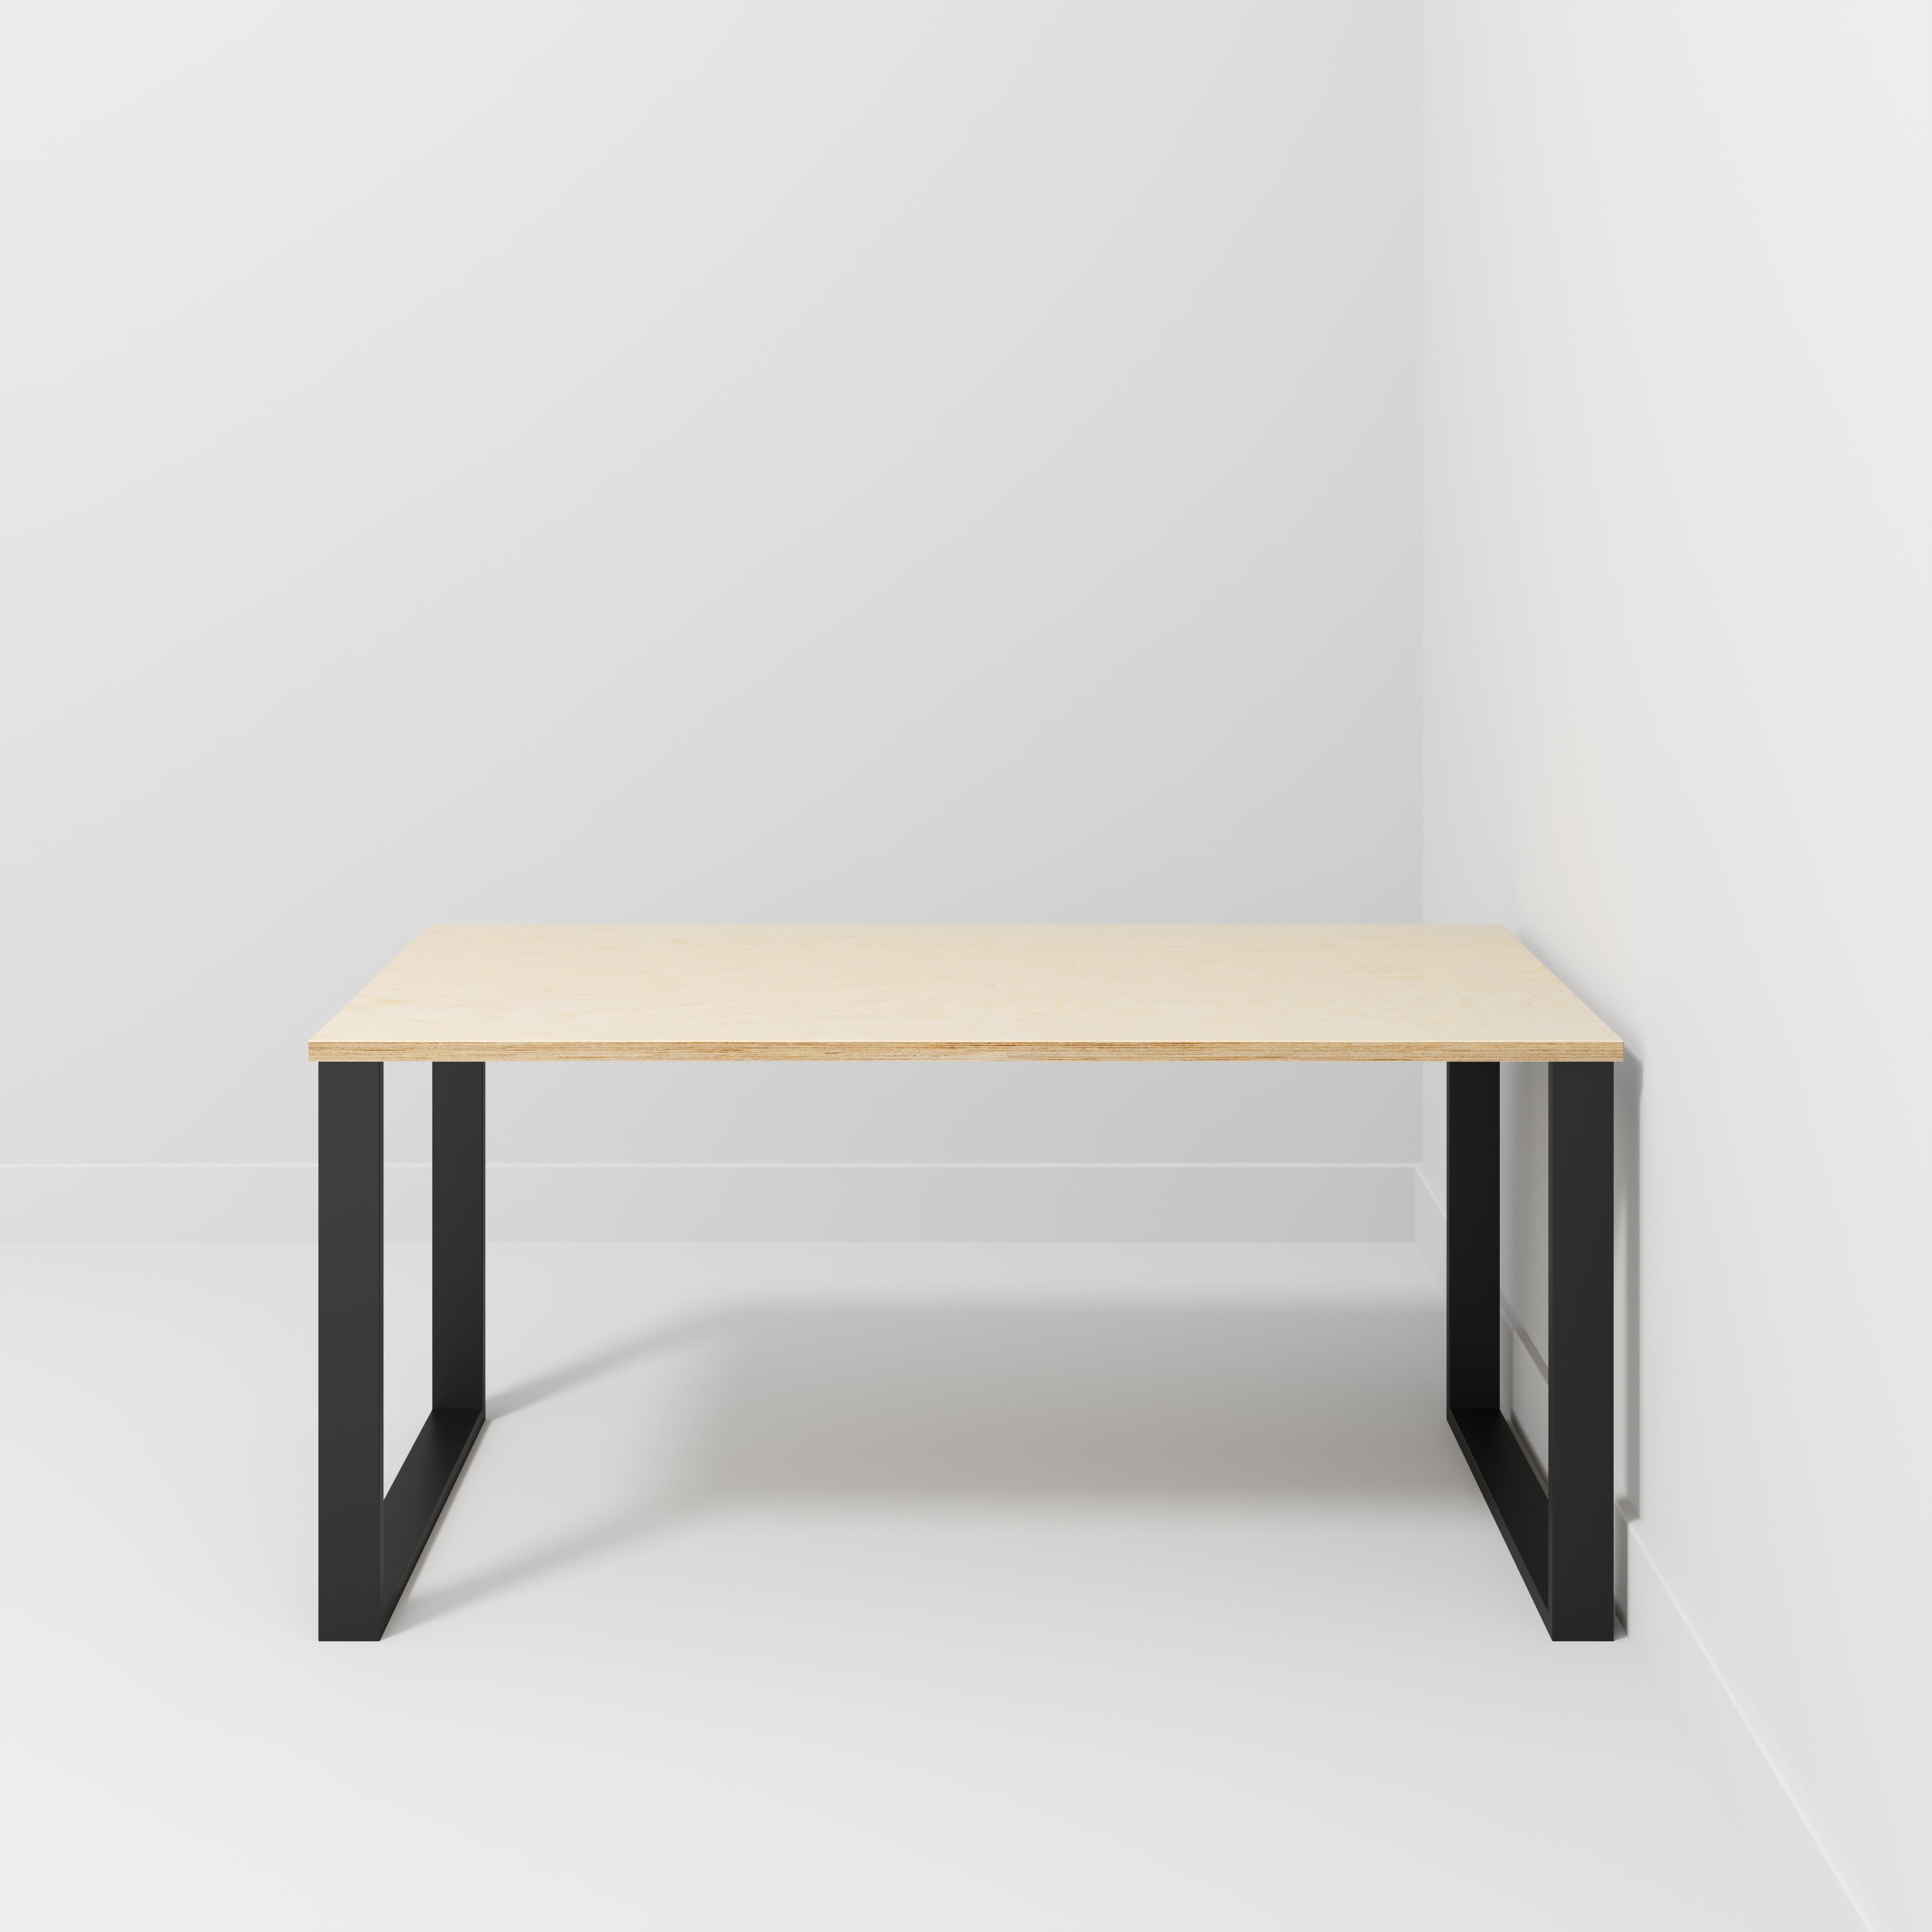 Custom Plywood Table with Square Industrial Legs